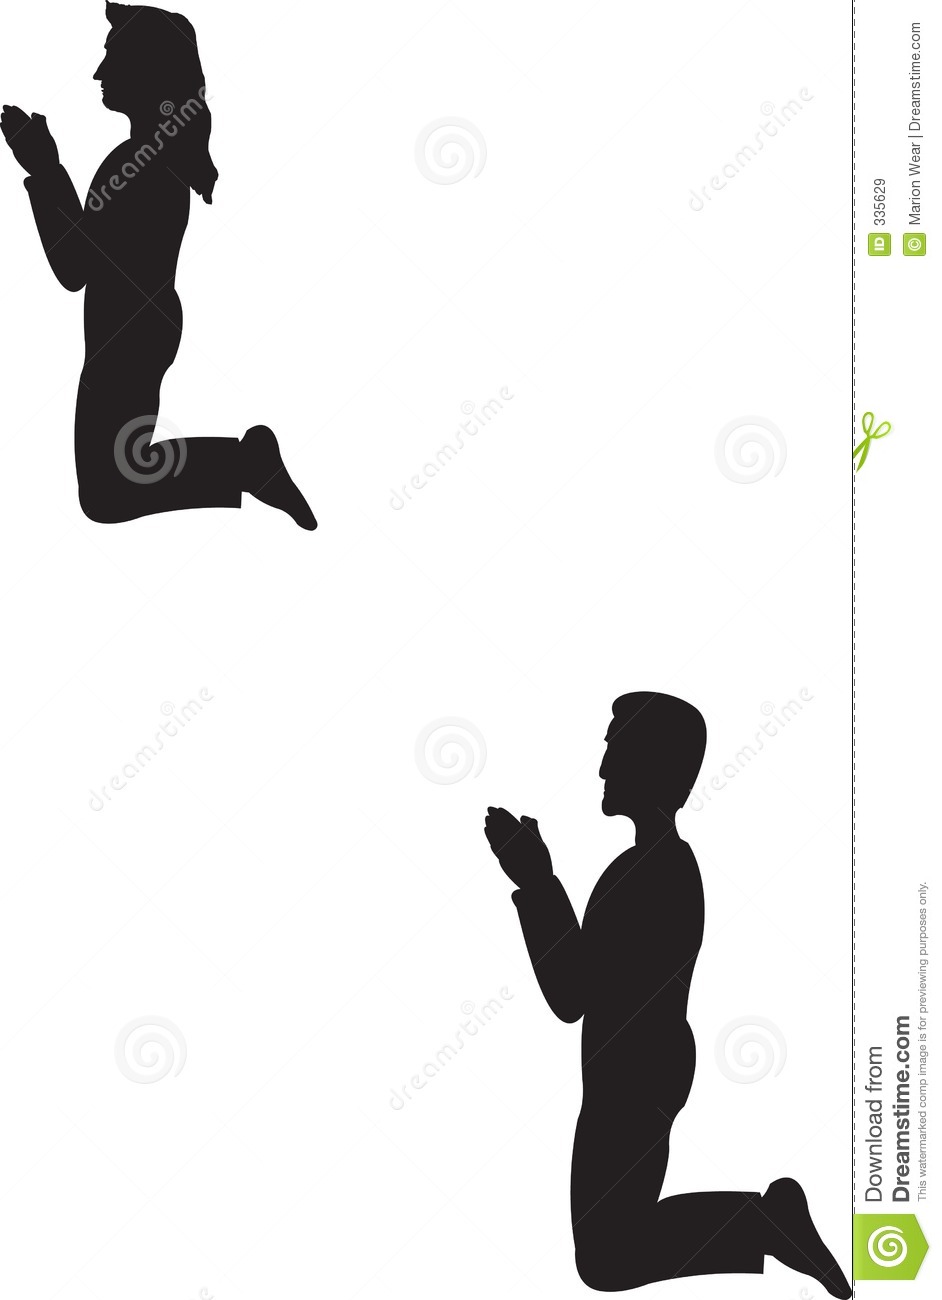 Man And Woman Kneeling Royalty Free Stock Images   Image  335629